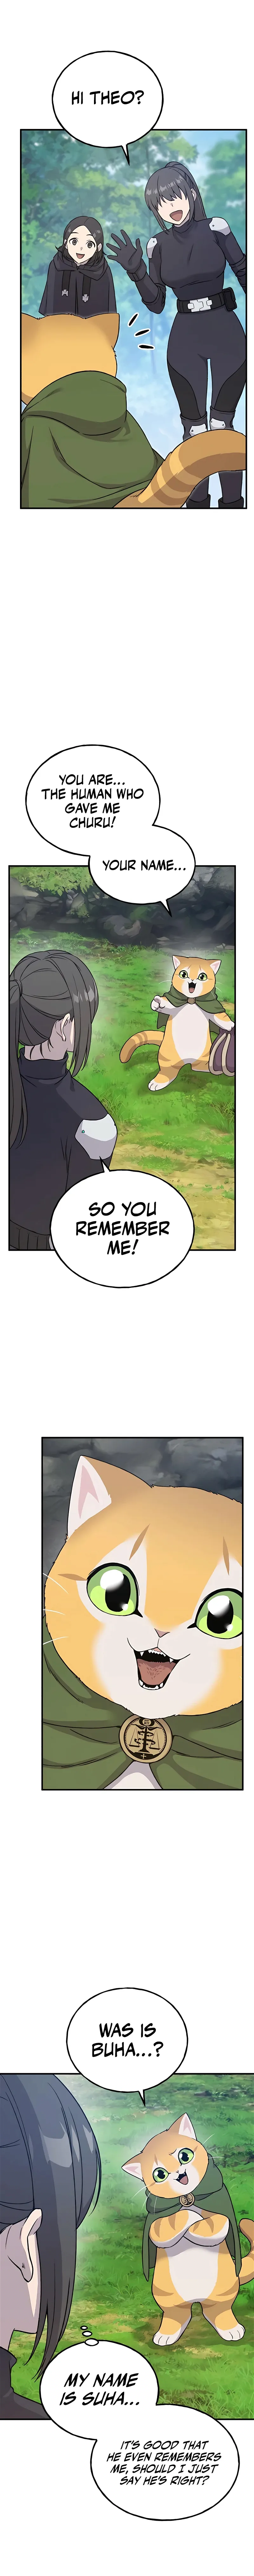 Solo Farming In The Tower Chapter 18 page 4